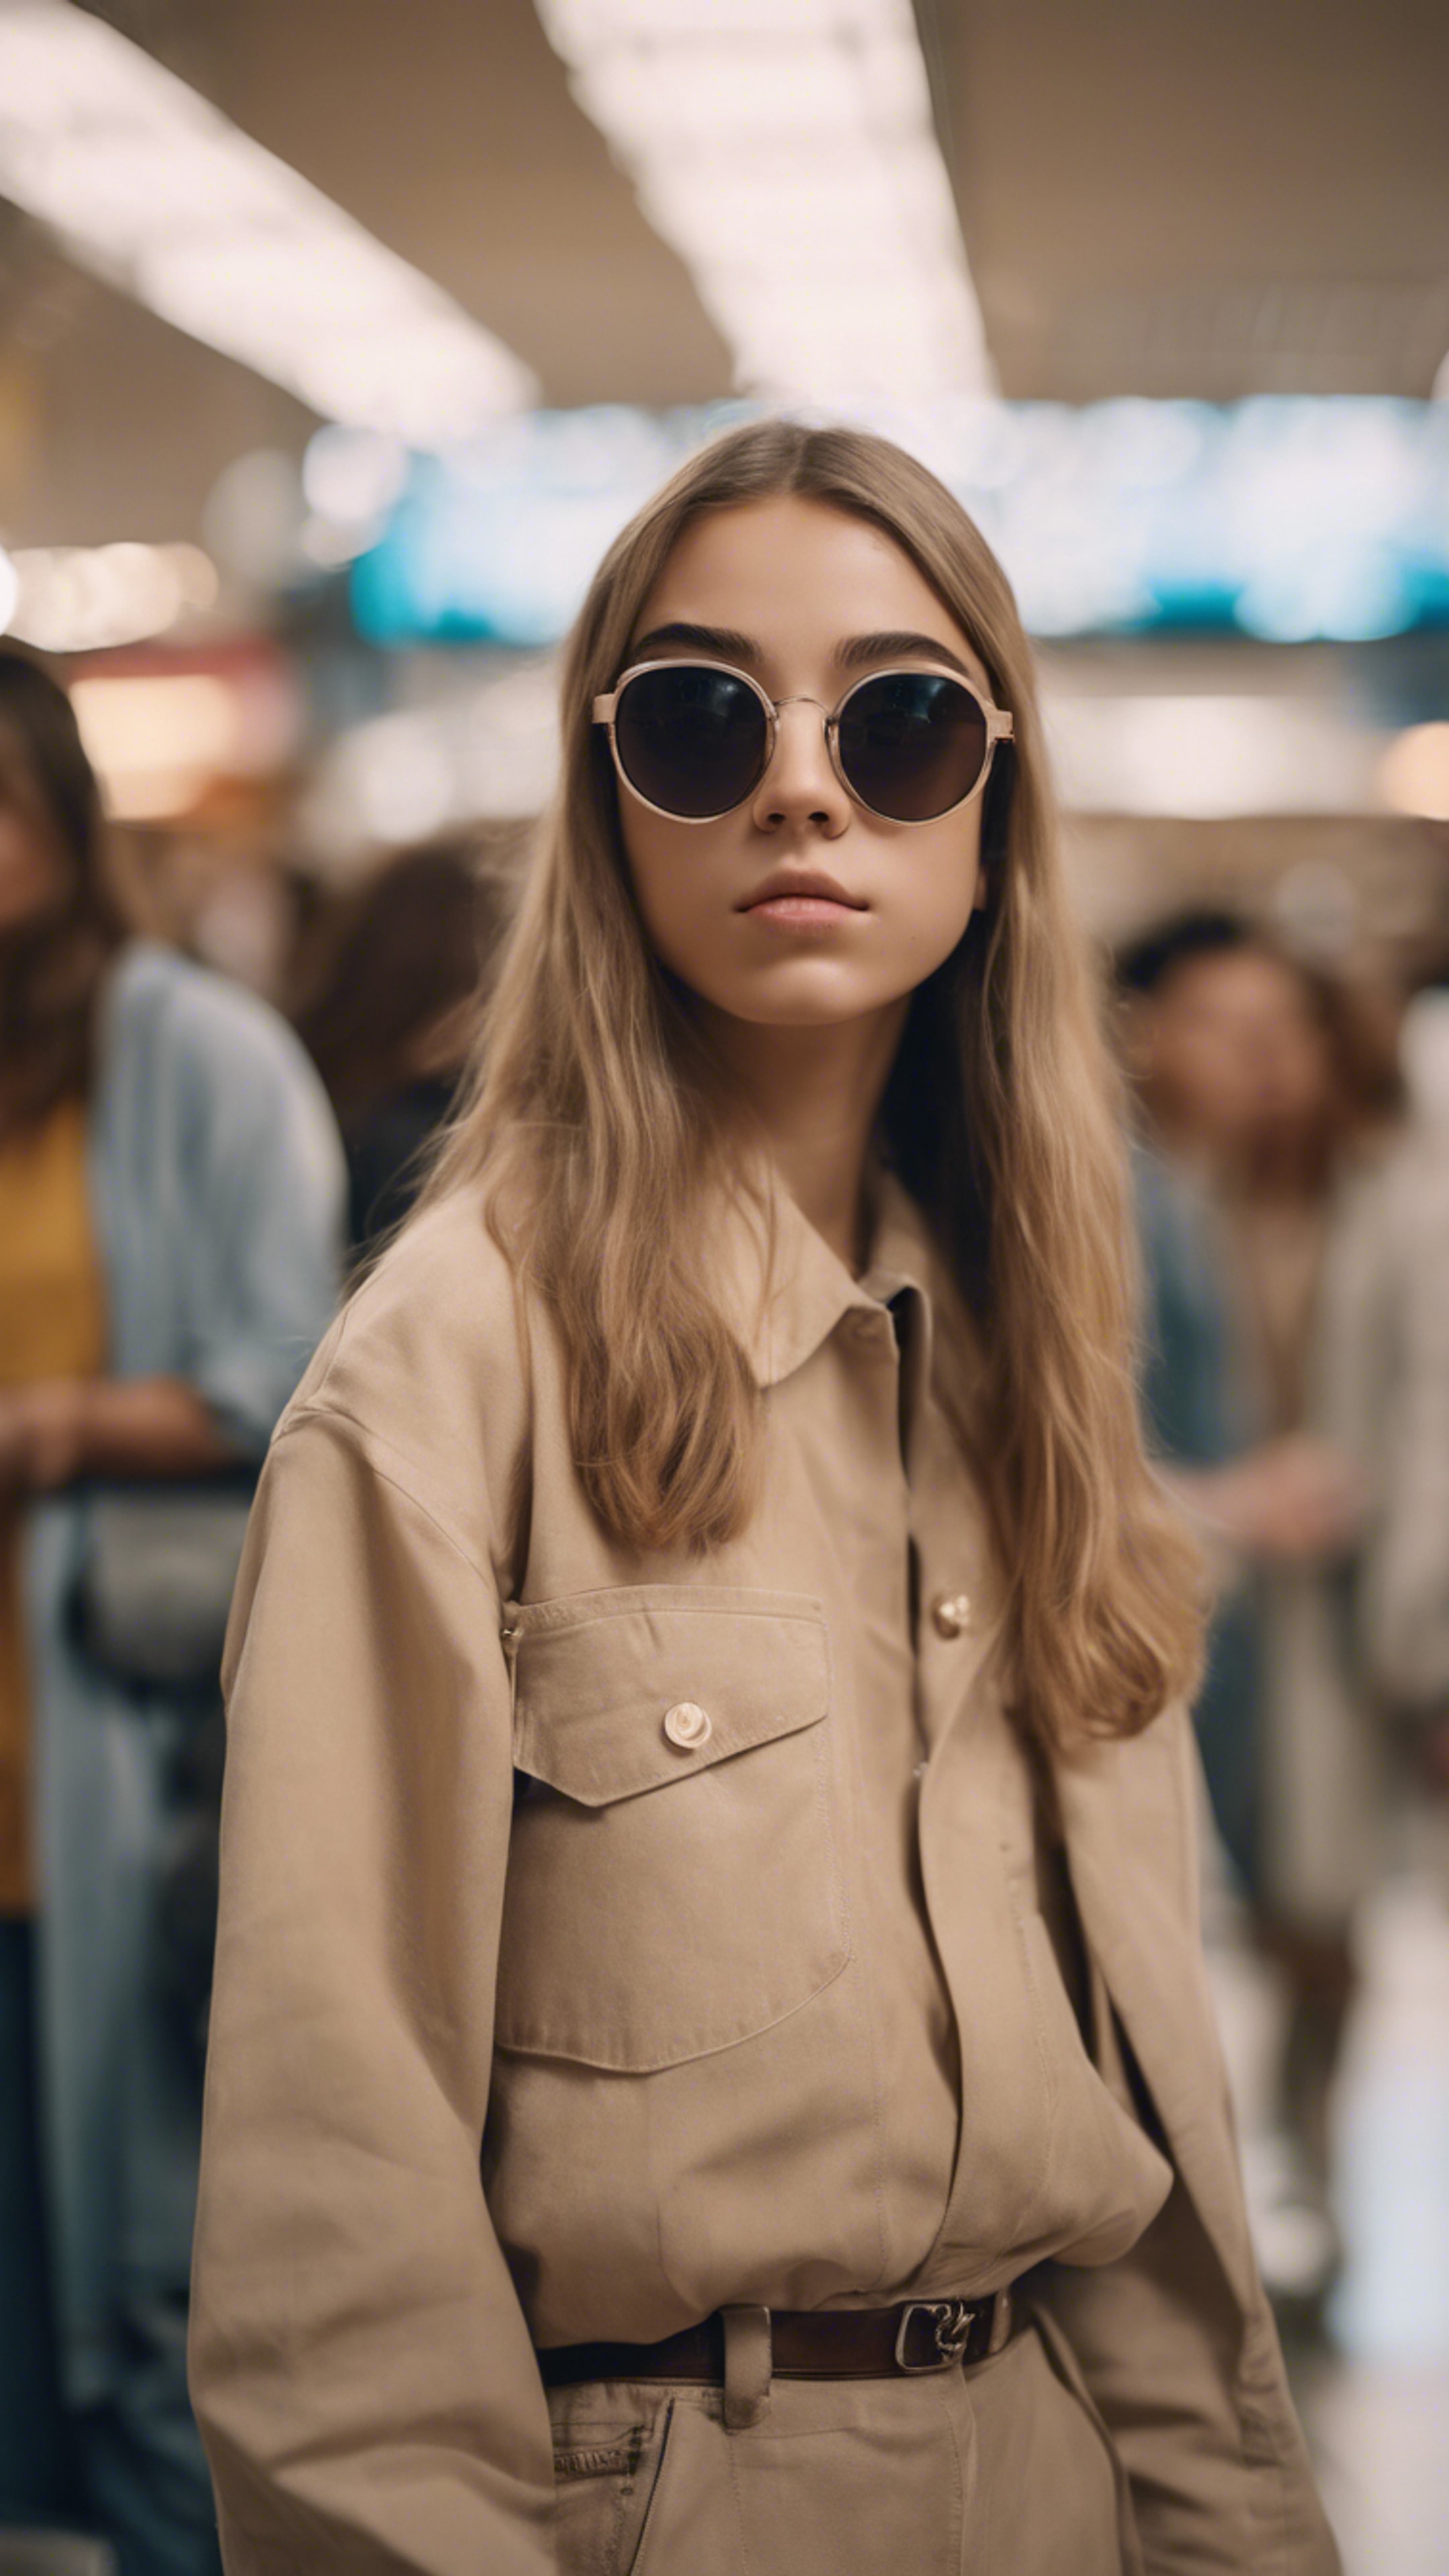 A teenage girl wearing oversized beige Y2K sunglasses in a crowded shopping mall. Tapet[de9d60706497471bab6a]